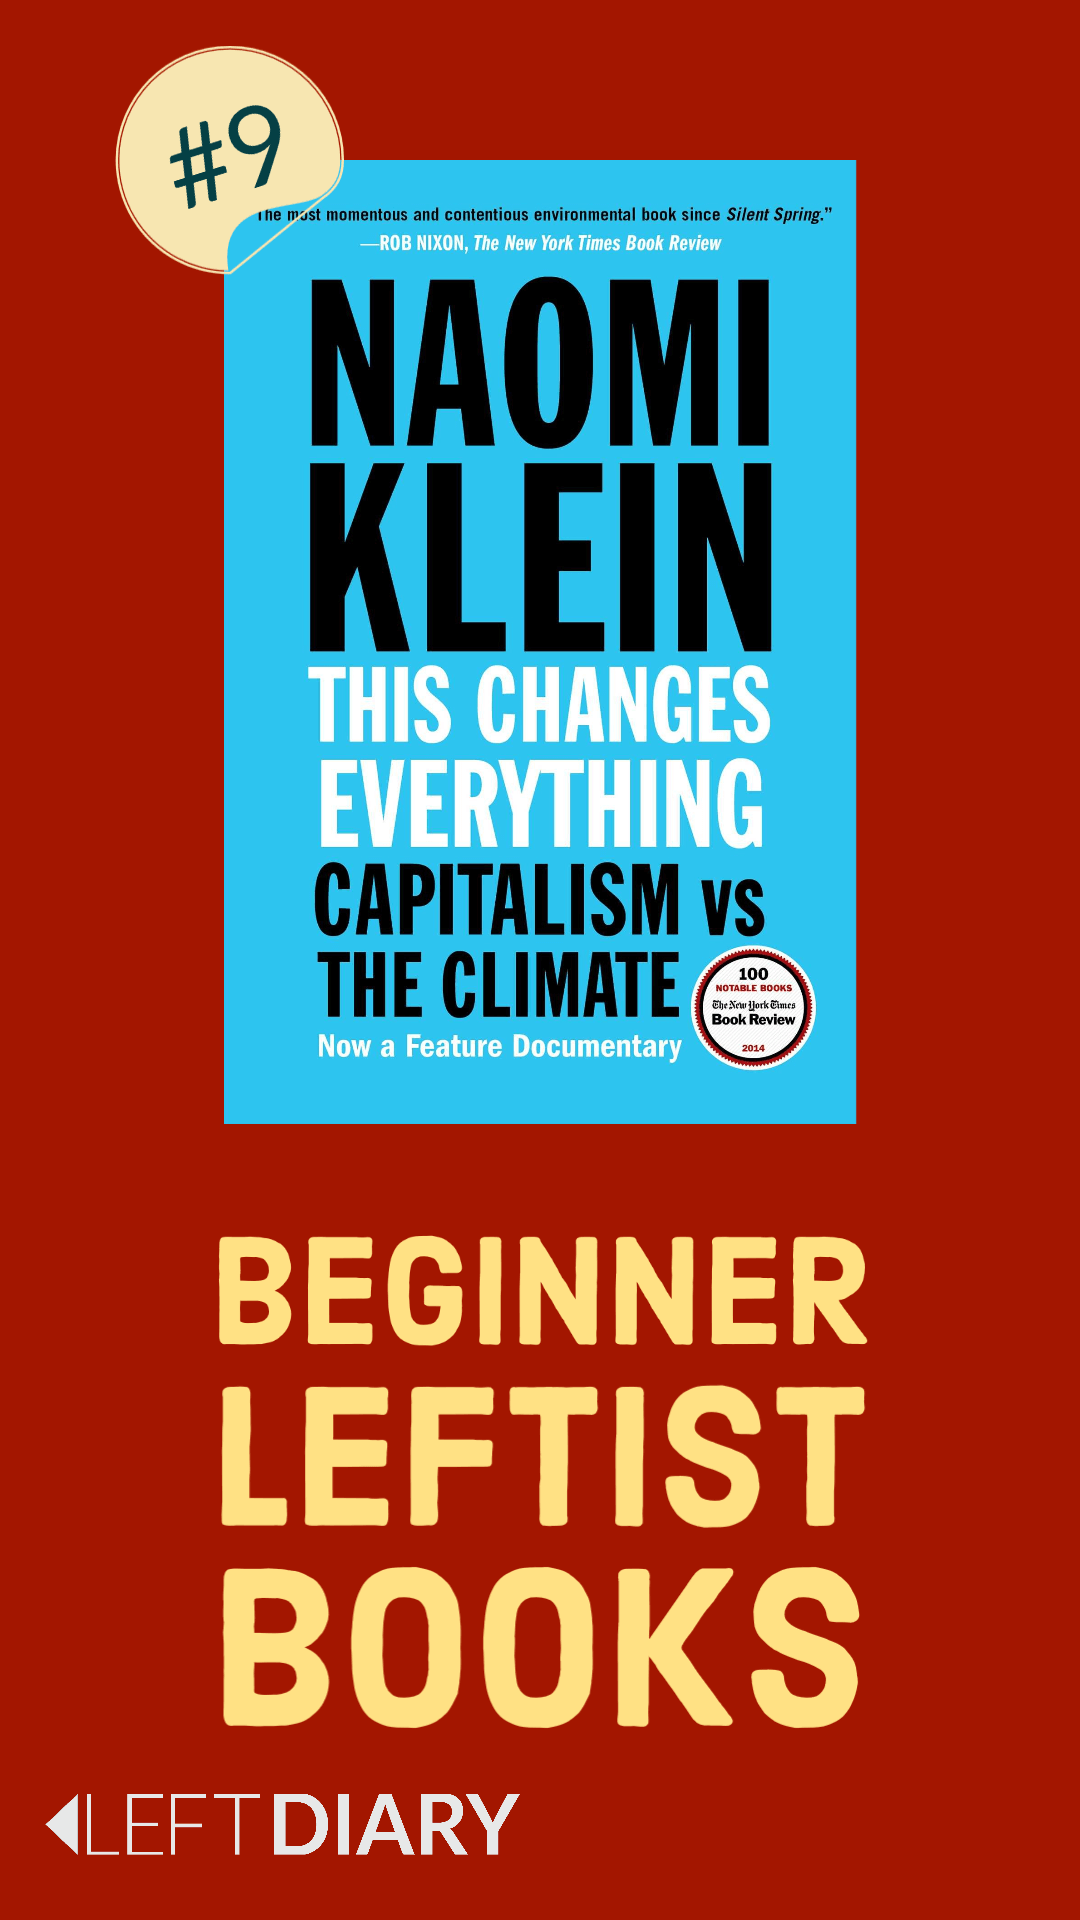 Beginner anti-capitalist books This Changes Everything: Capitalism vs the Climate by Naomi Klein